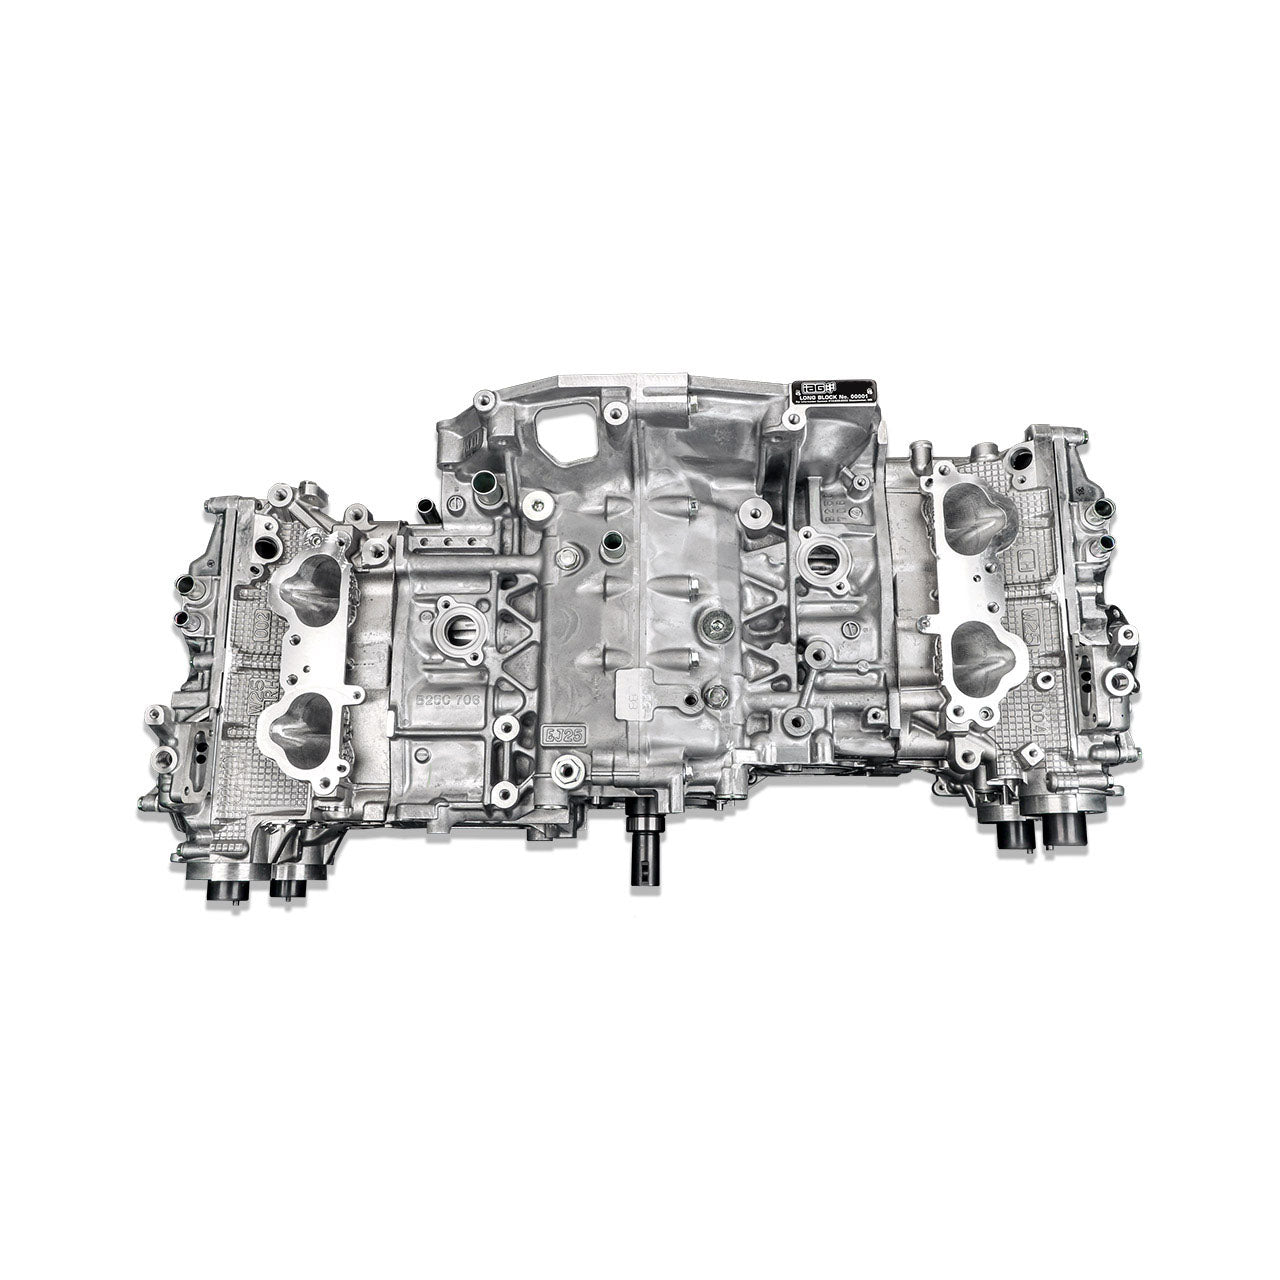 IAG 1150 Closed Deck Long Block Engine W/ IAG 1150 Heads / GSC S3 Camshafts.for 02-05 USDM WRX 2.5L (HYBRID)  (REQUIRES Standalone Engine Management May Not Be Compatible With AVCS)